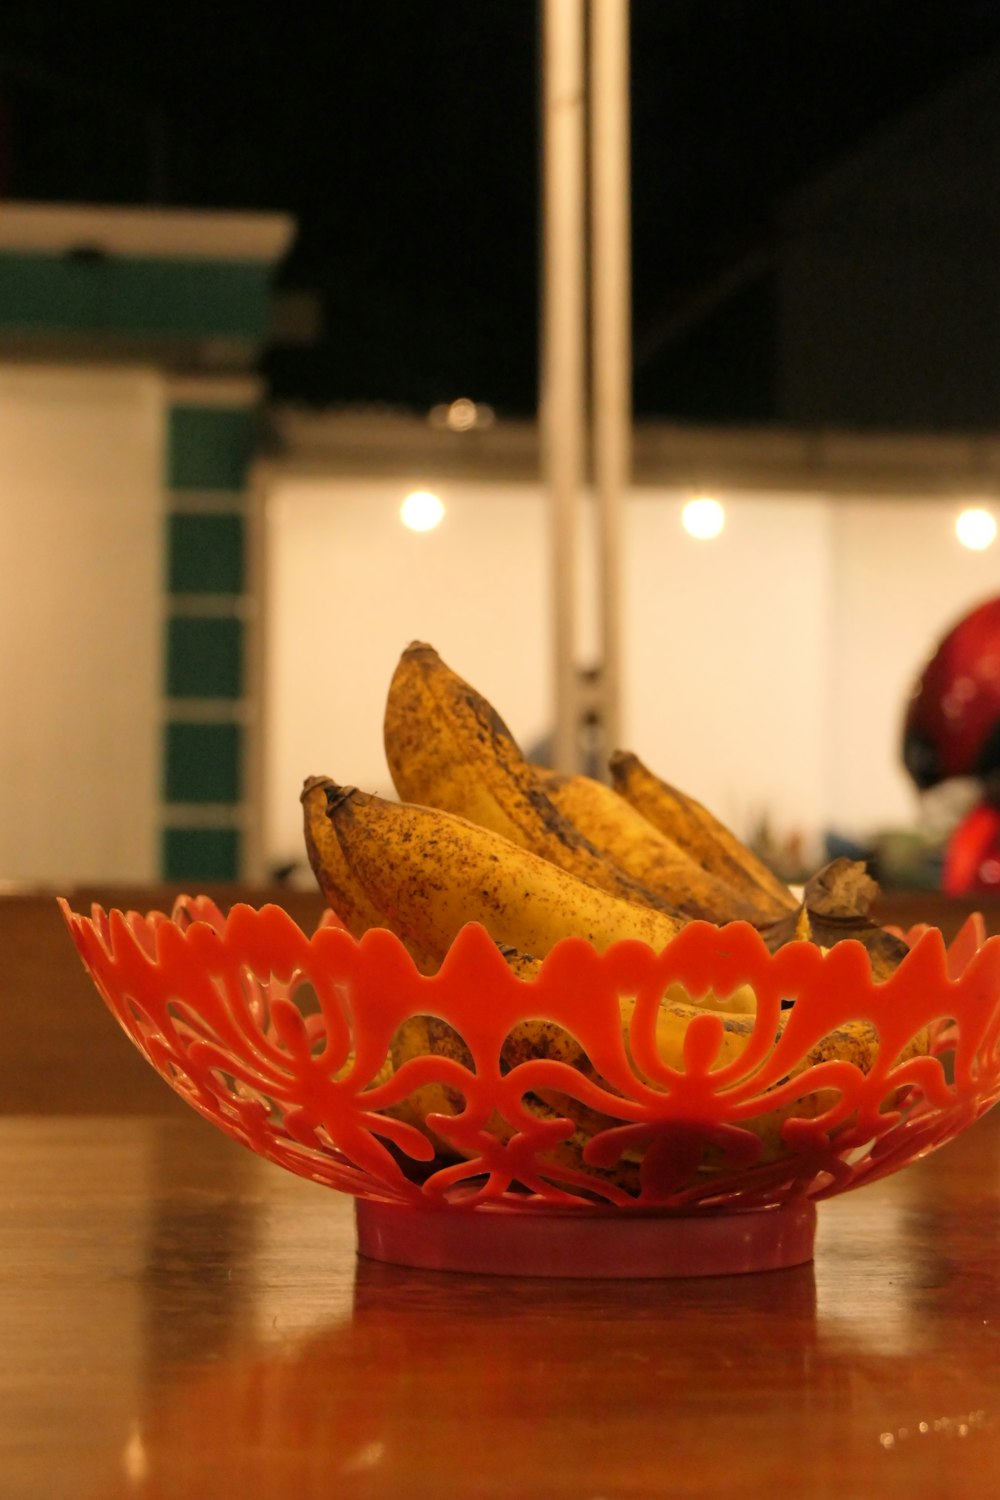 ripe banana fruits in red plastic bowl on table